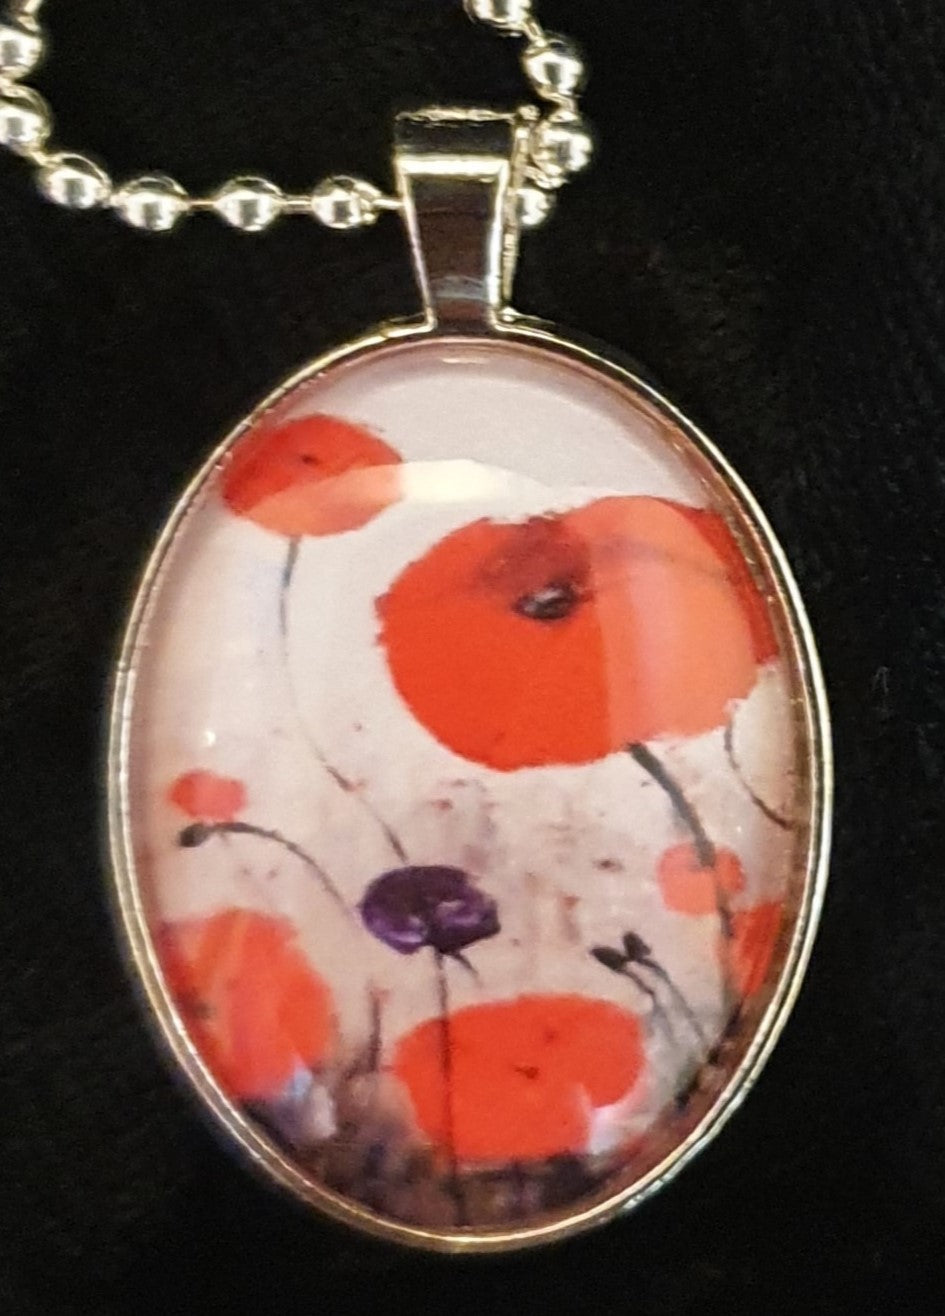 For The Fallen - 22 x 30mm OVAL PENDANT & NECKLACE - Designed from original ANZAC Day artwork - red poppies